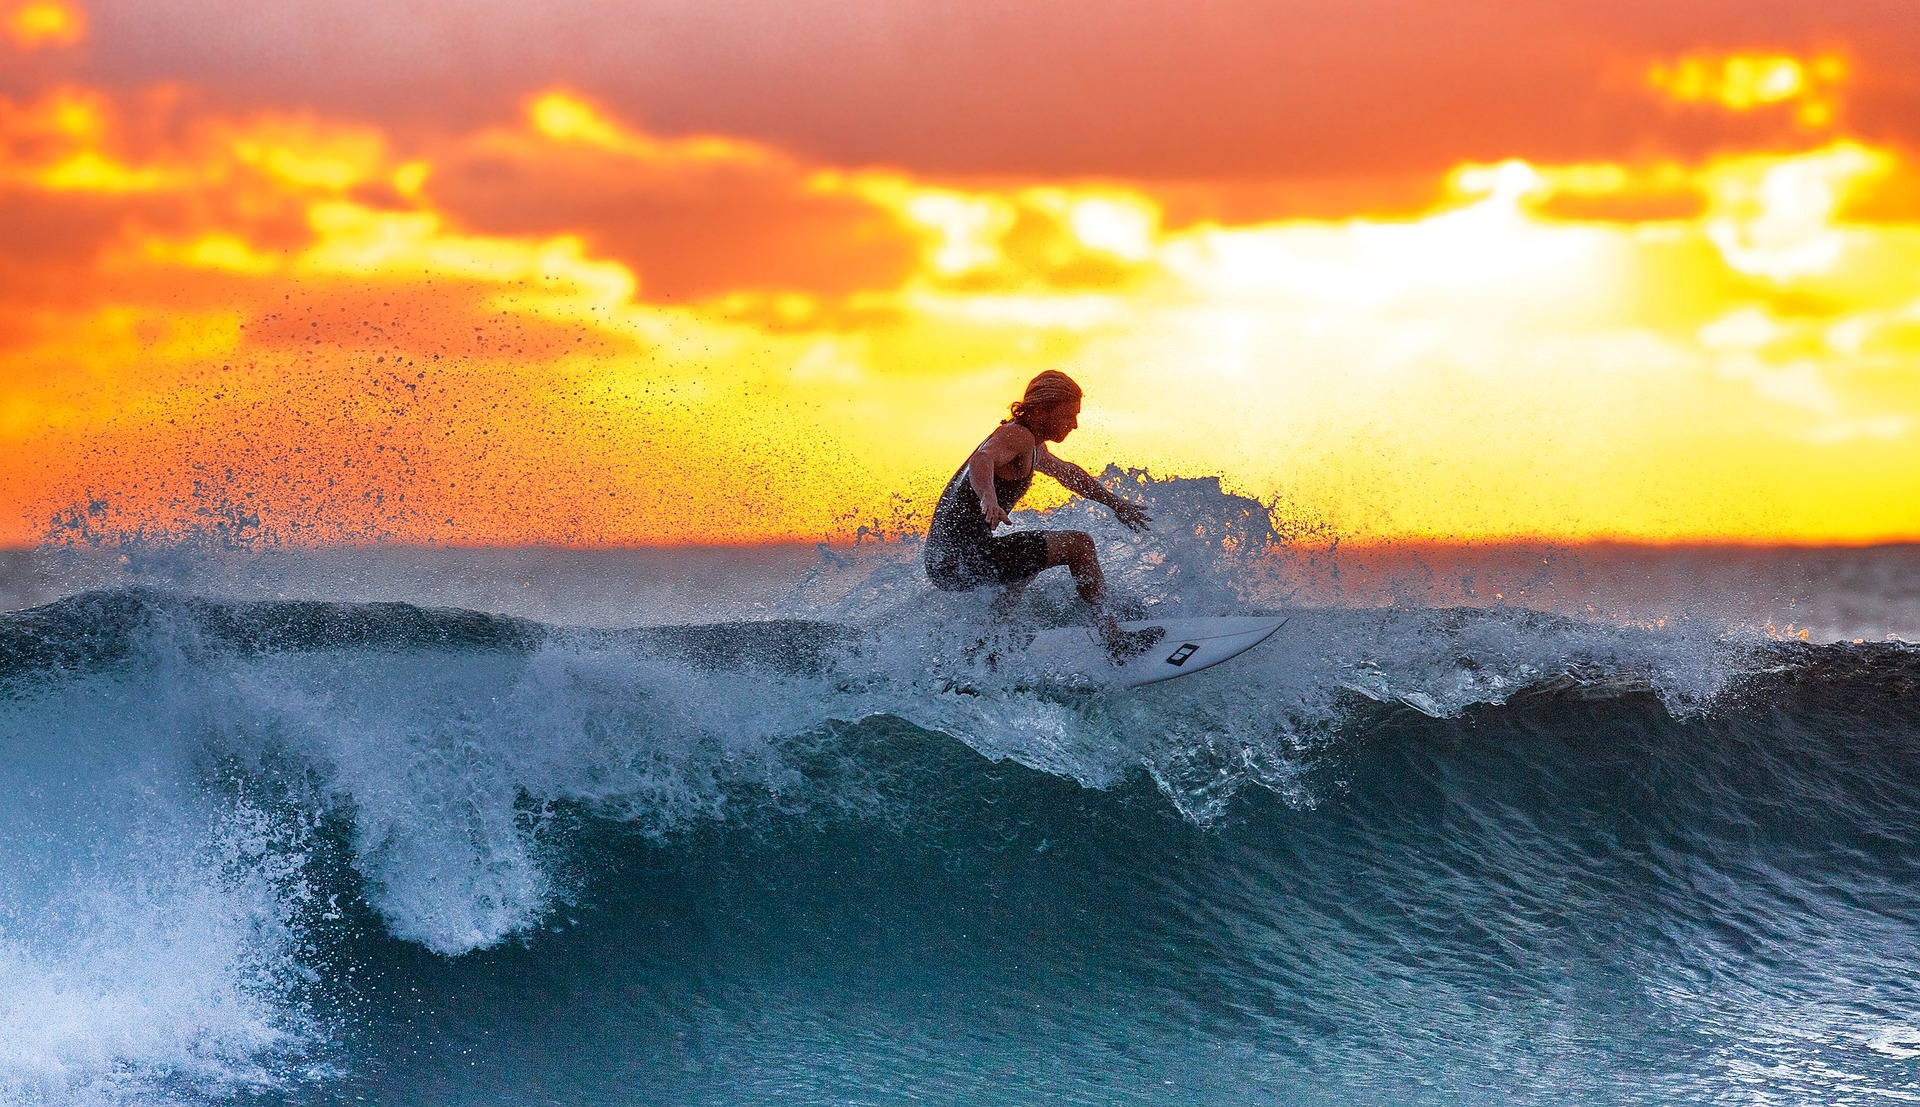 A surfer stands strong on their surfboard, riding the wave with a sunset glowing behind him. 